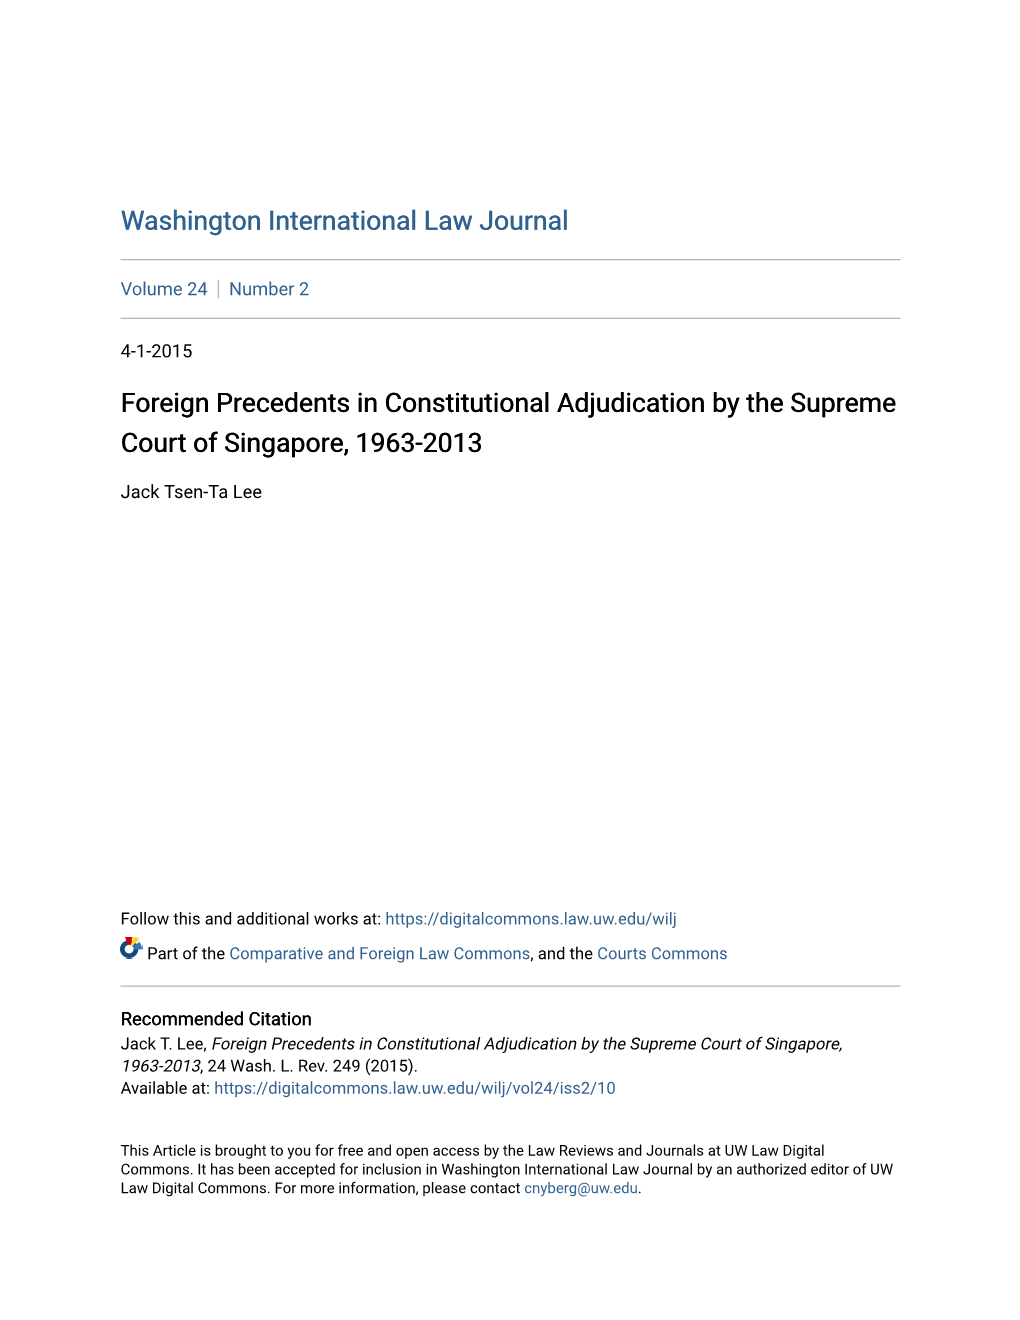 Foreign Precedents in Constitutional Adjudication by the Supreme Court of Singapore, 1963-2013